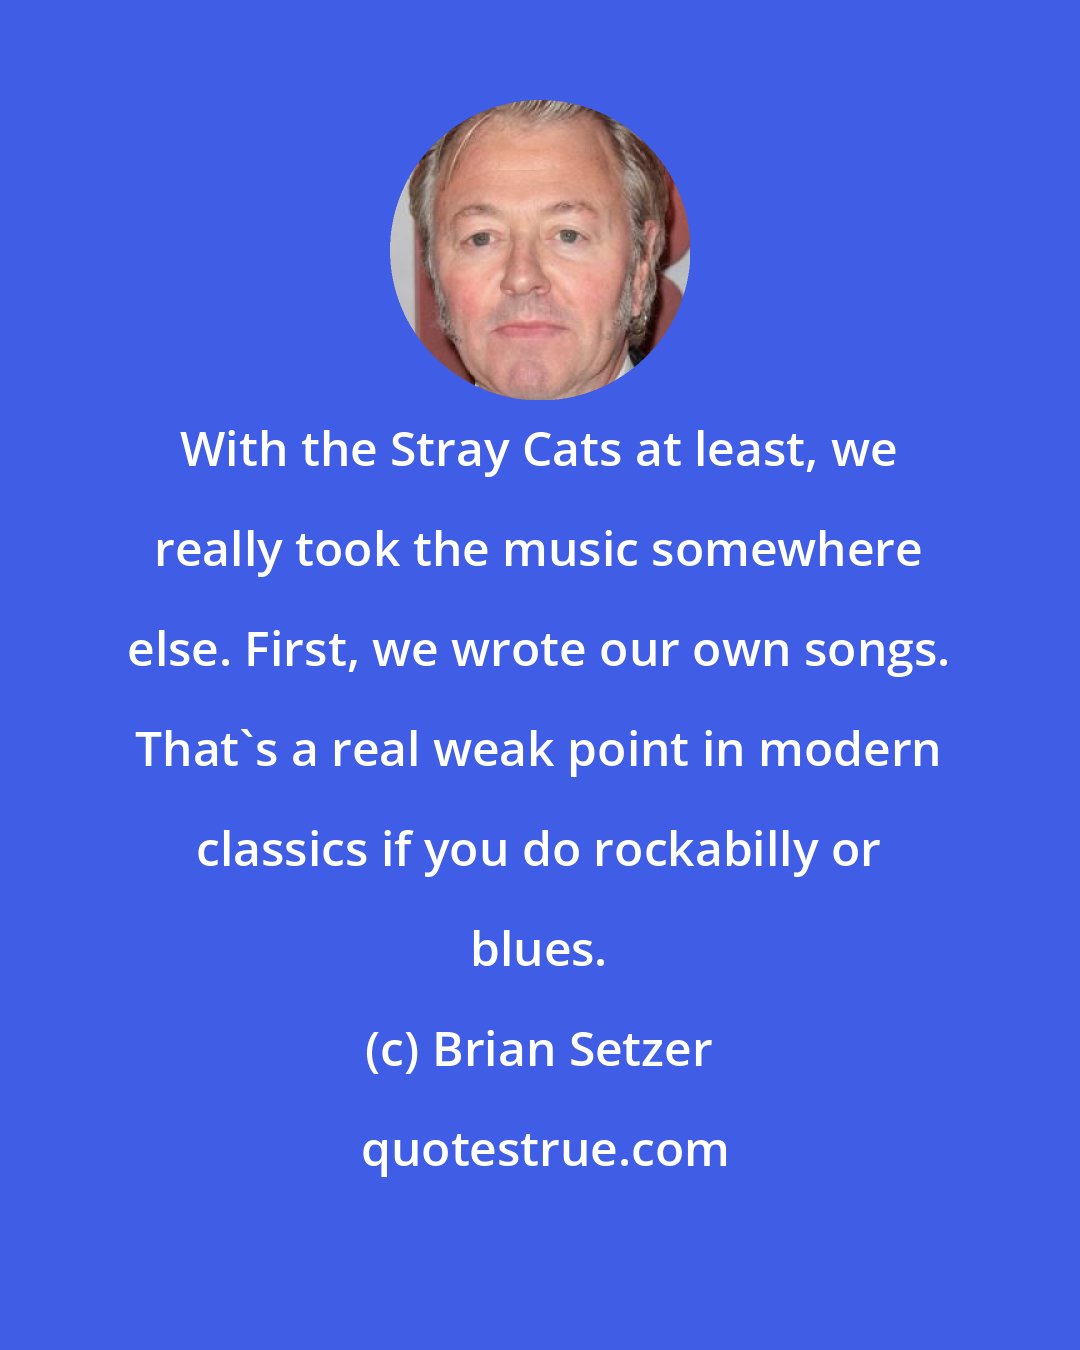 Brian Setzer: With the Stray Cats at least, we really took the music somewhere else. First, we wrote our own songs. That's a real weak point in modern classics if you do rockabilly or blues.